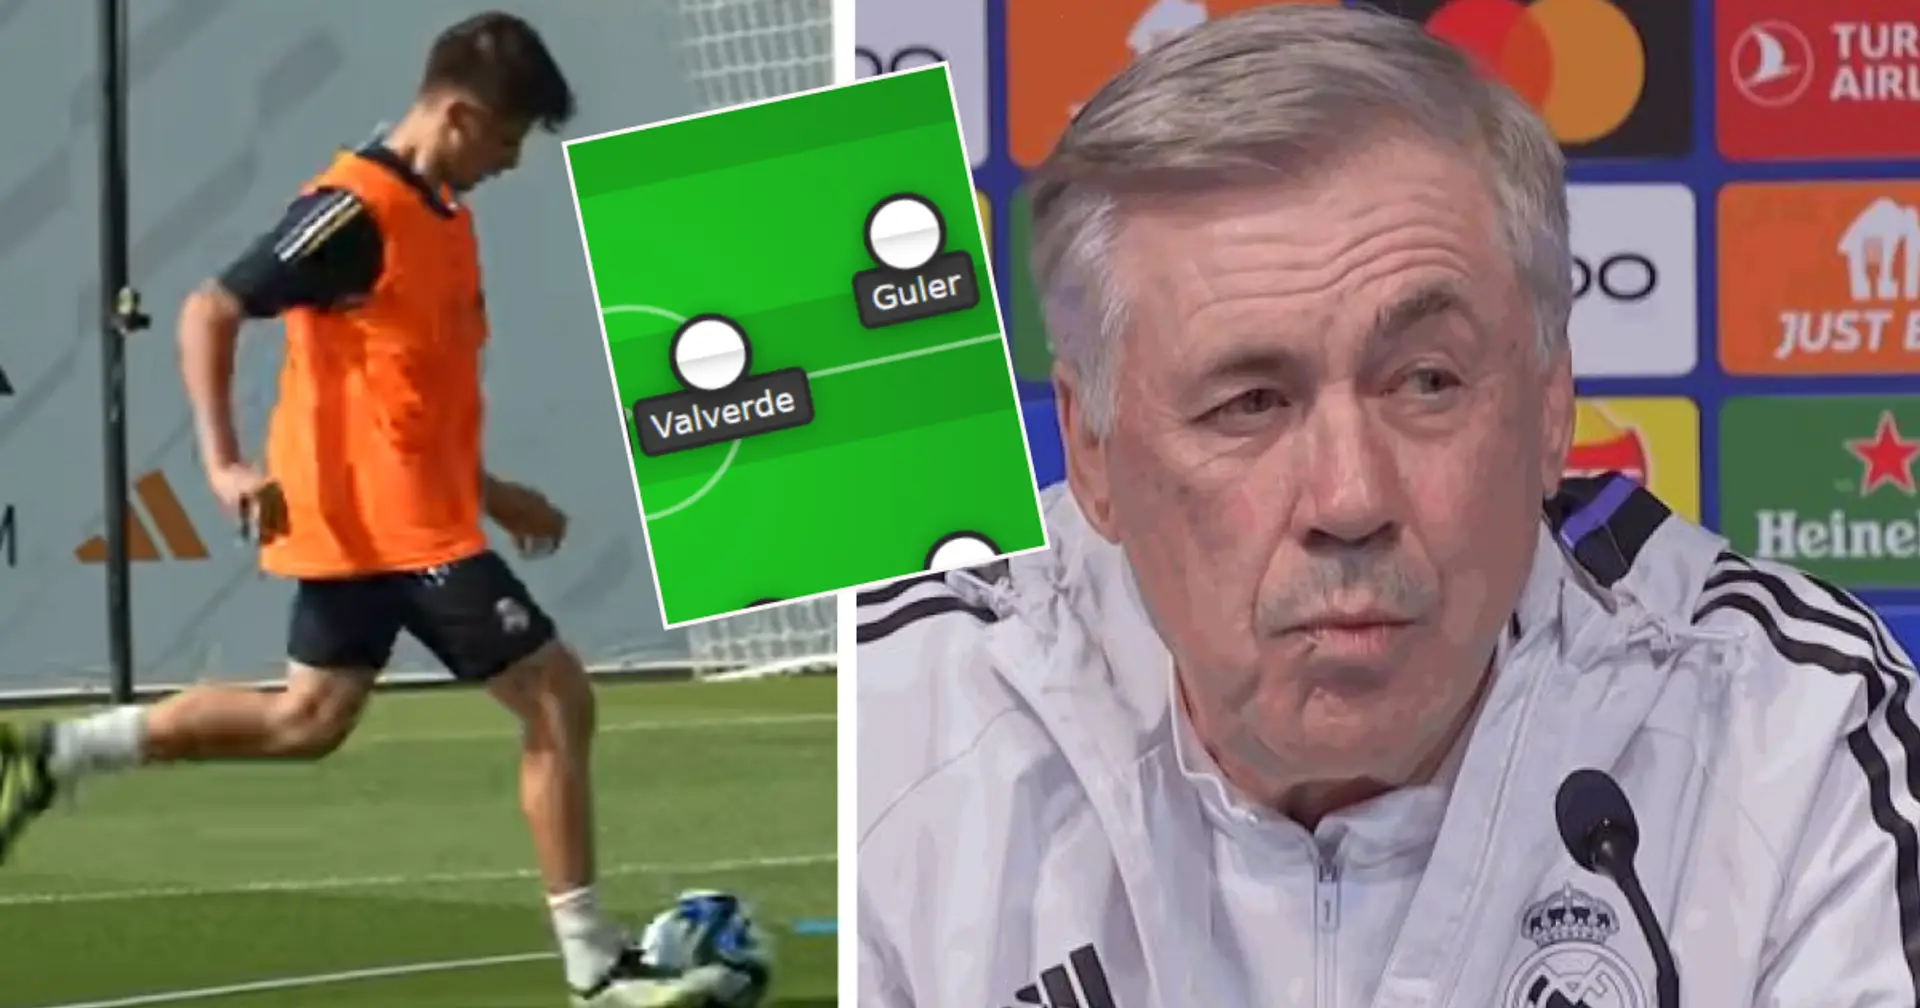 Ancelotti keeps using Arda Guler in one position in training — shown in 2 lineups